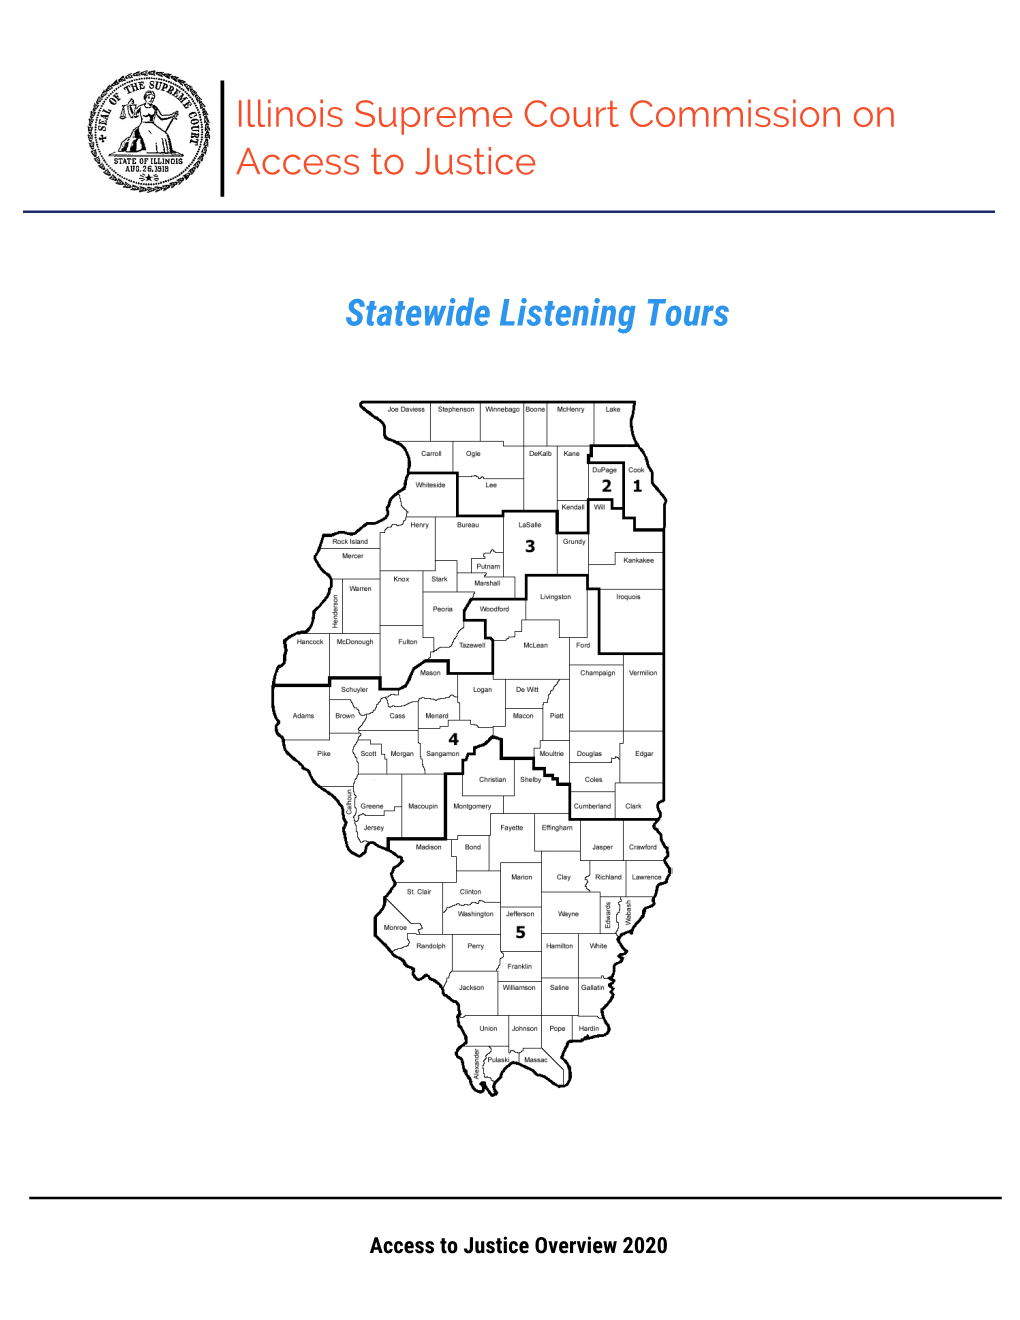 Access to Justice Overview 2020 ILLINOIS SUPREME COURT COMMISSION on ACCESS to JUSTICE ACCESS to JUSTICE OVERVIEW 2020